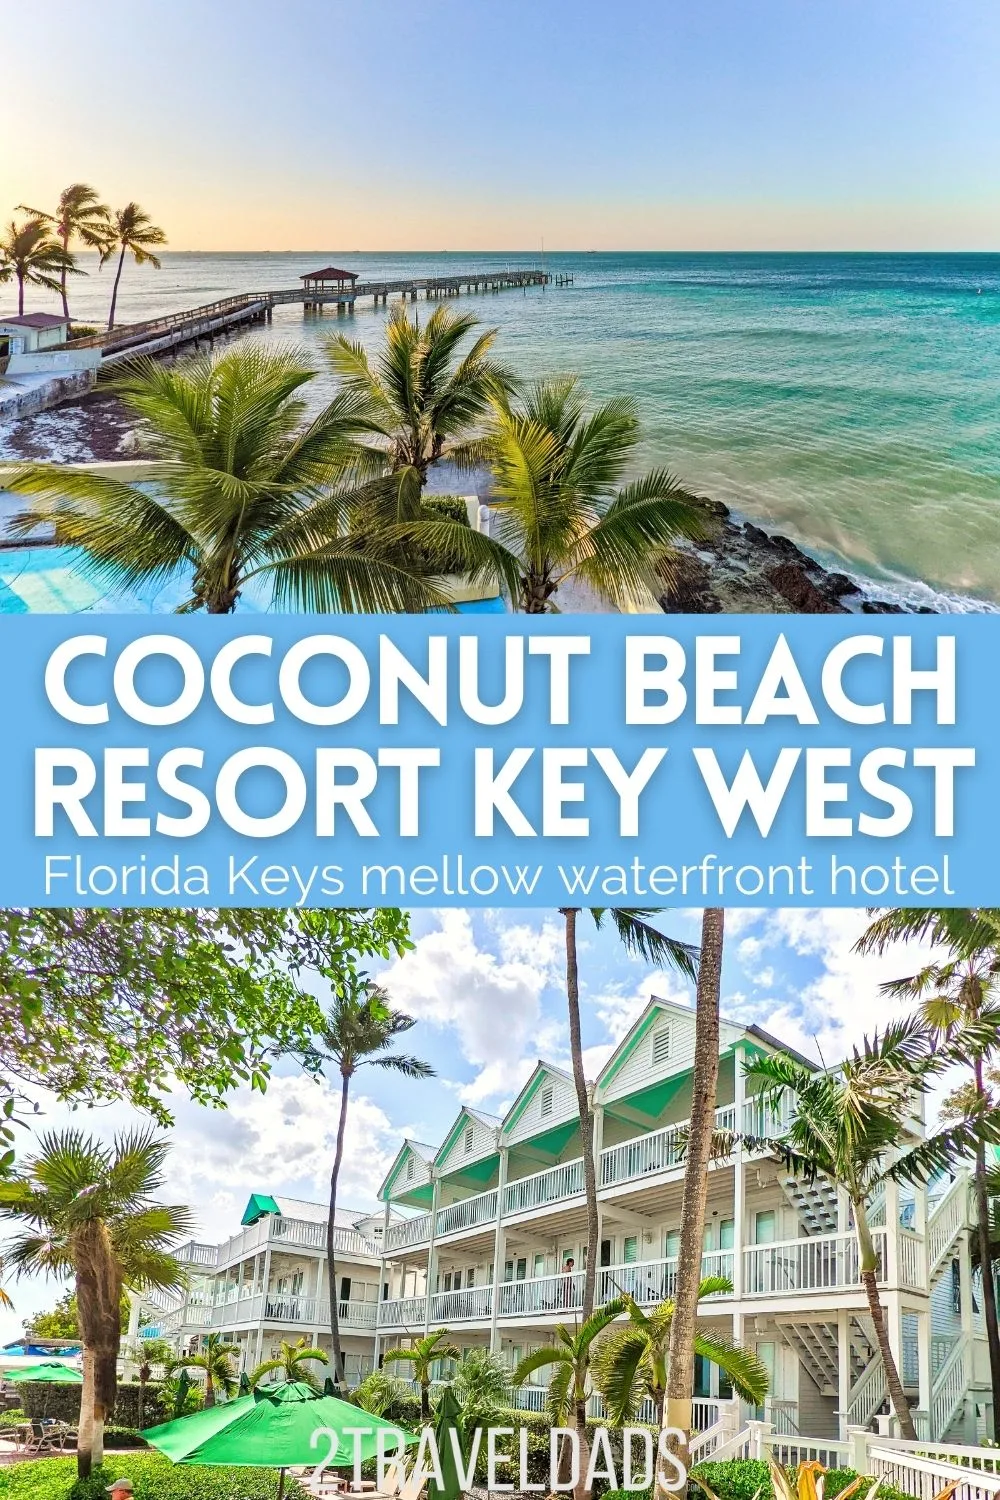 The Coconut Beach Resort Key West is the ideal hotel for anyone looking for an oceanfront suite, heated pool and perfect Key West views. Details of the hotel, things to do in the Southernmost Point area, and tips for a great Key West vacation.